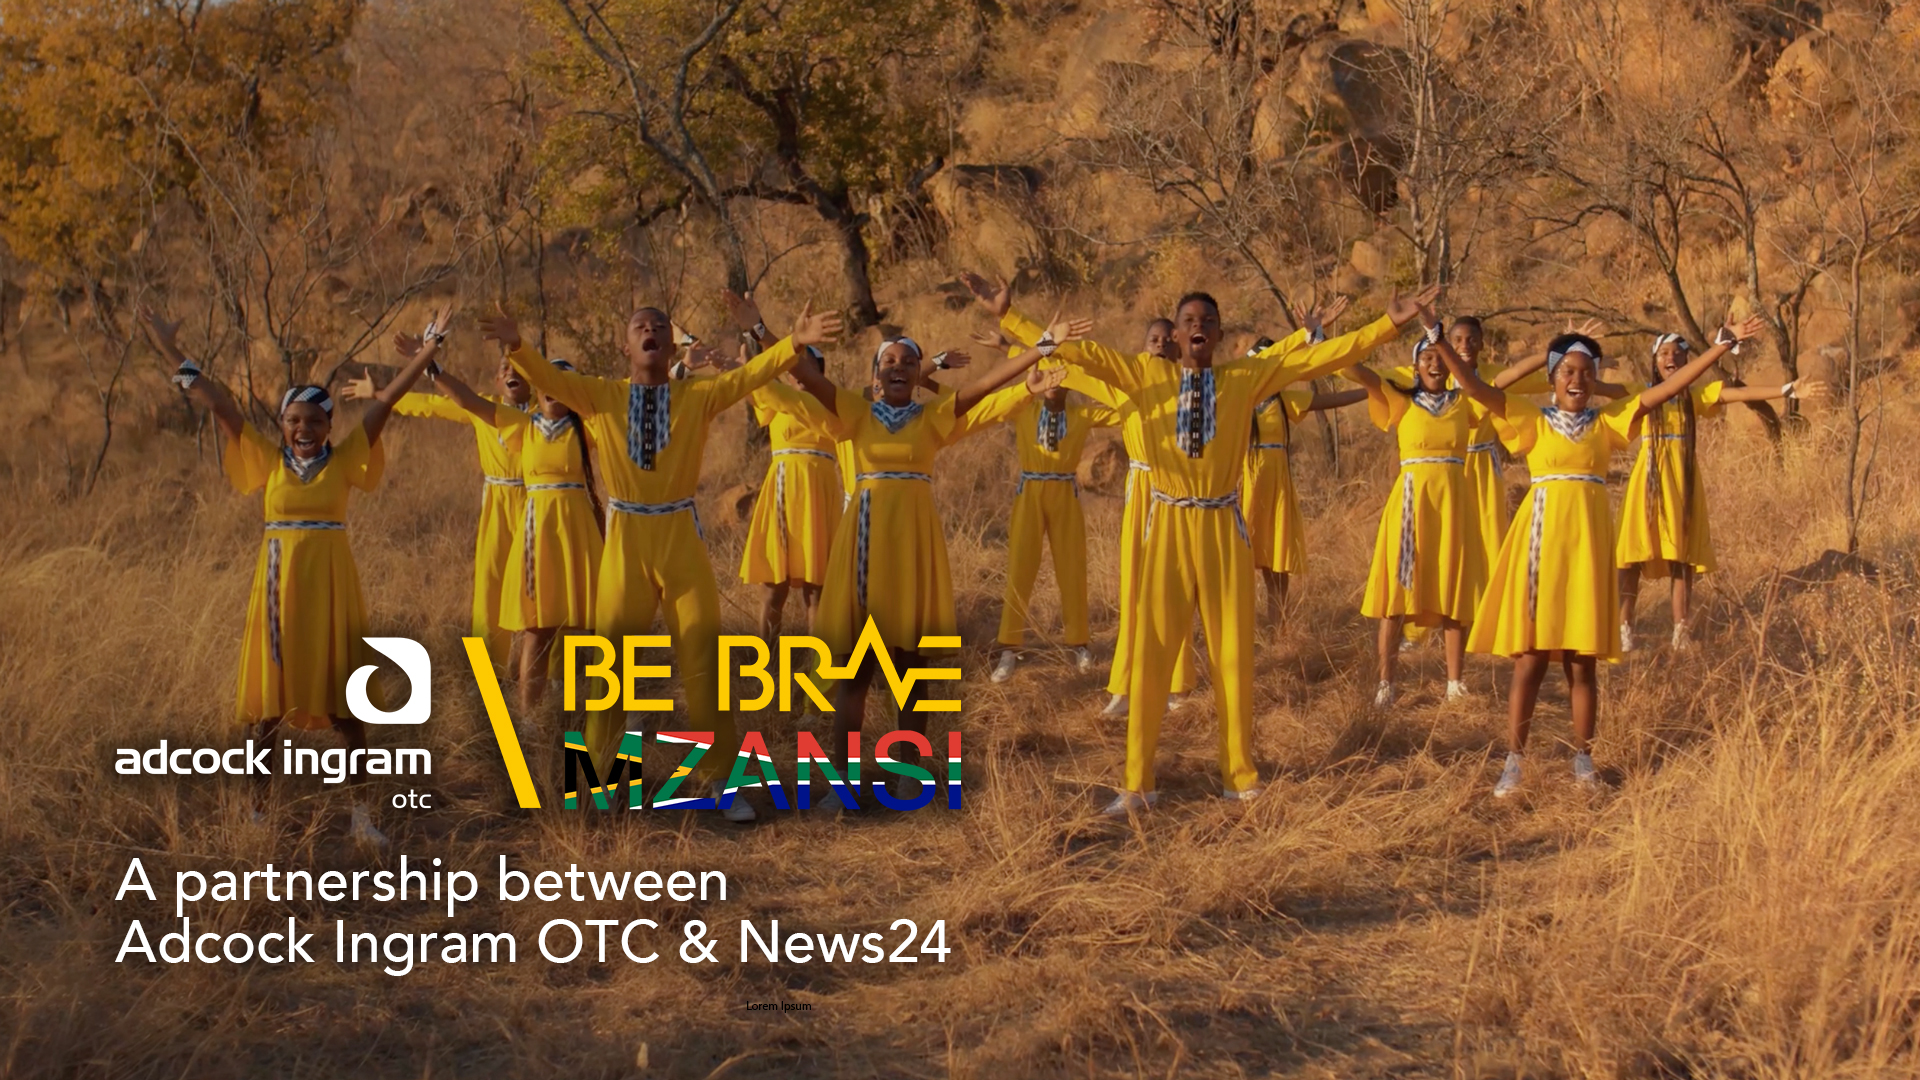 News24 in partnership with Adcock Ingram OTC launches season 4 of Sponsors of Brave: Be Brave Mzansi